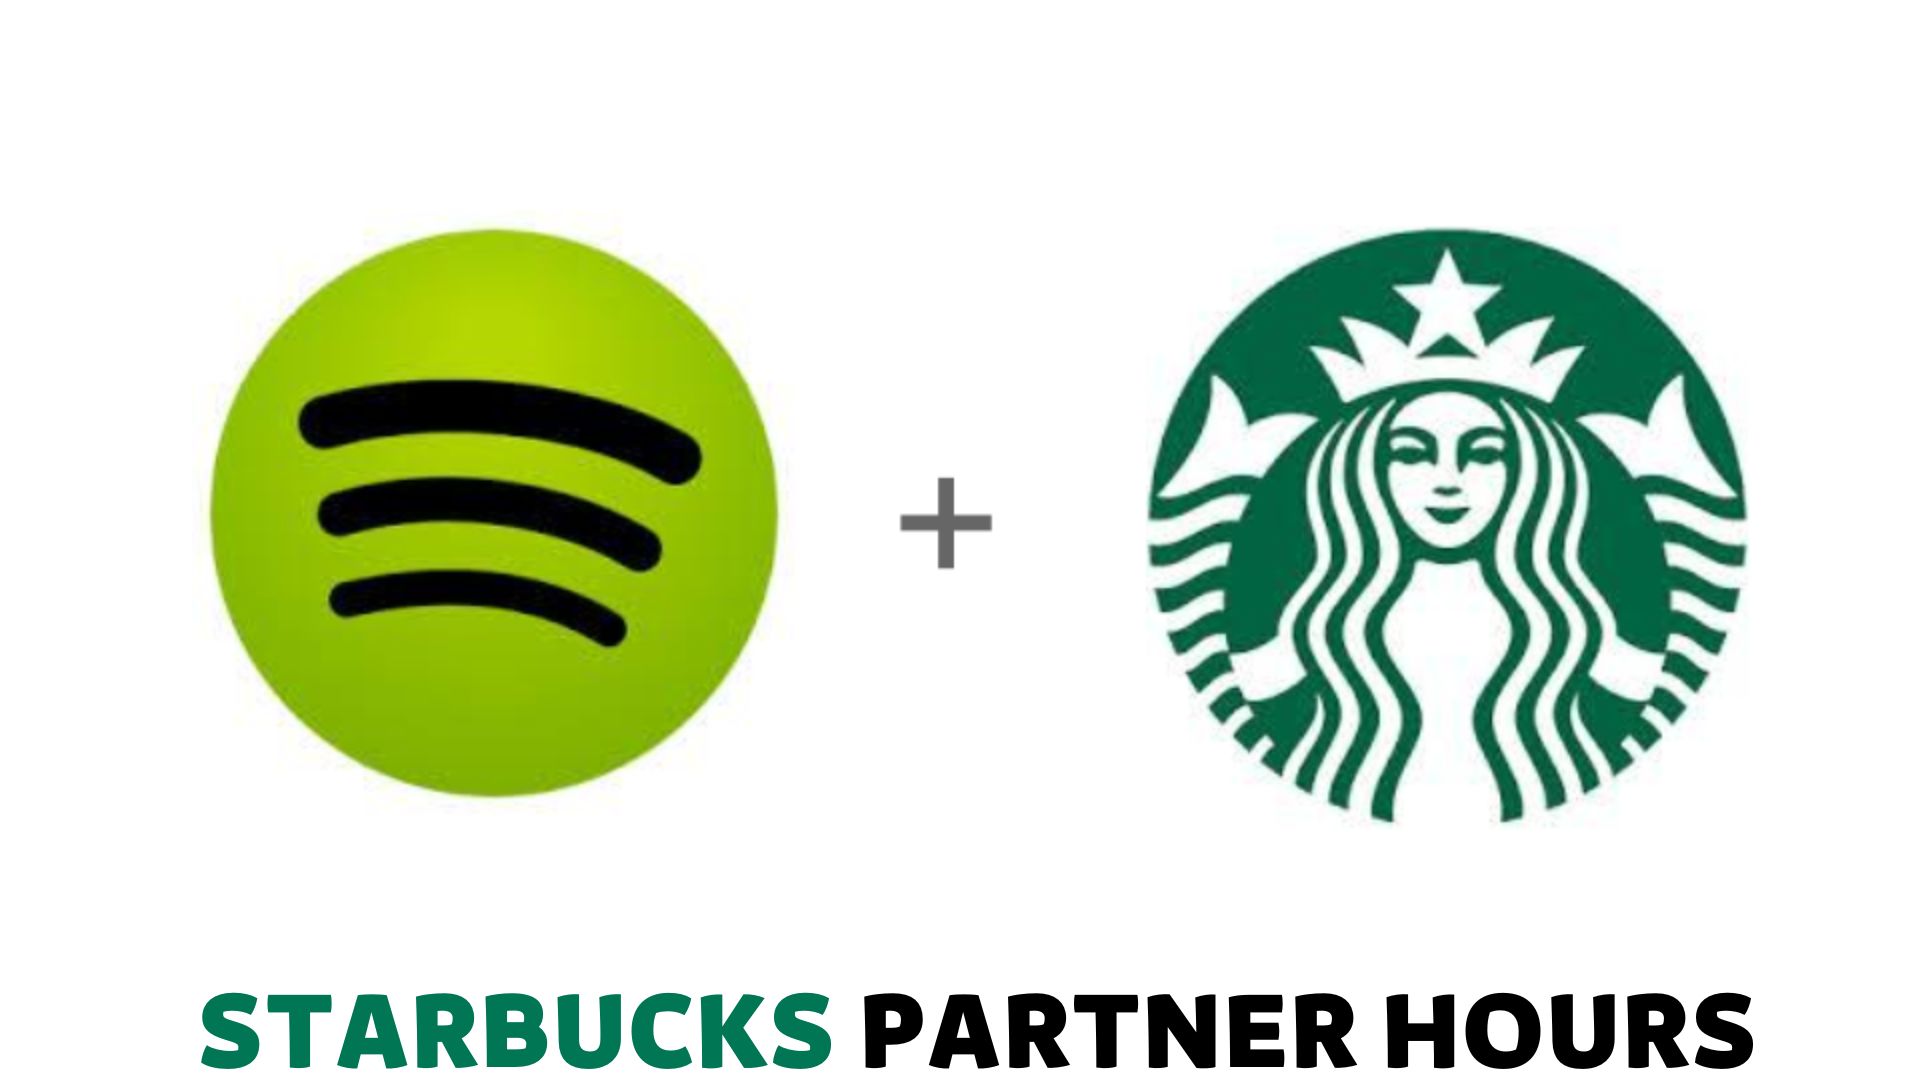 How to Get Free Spotify Starbucks Partner